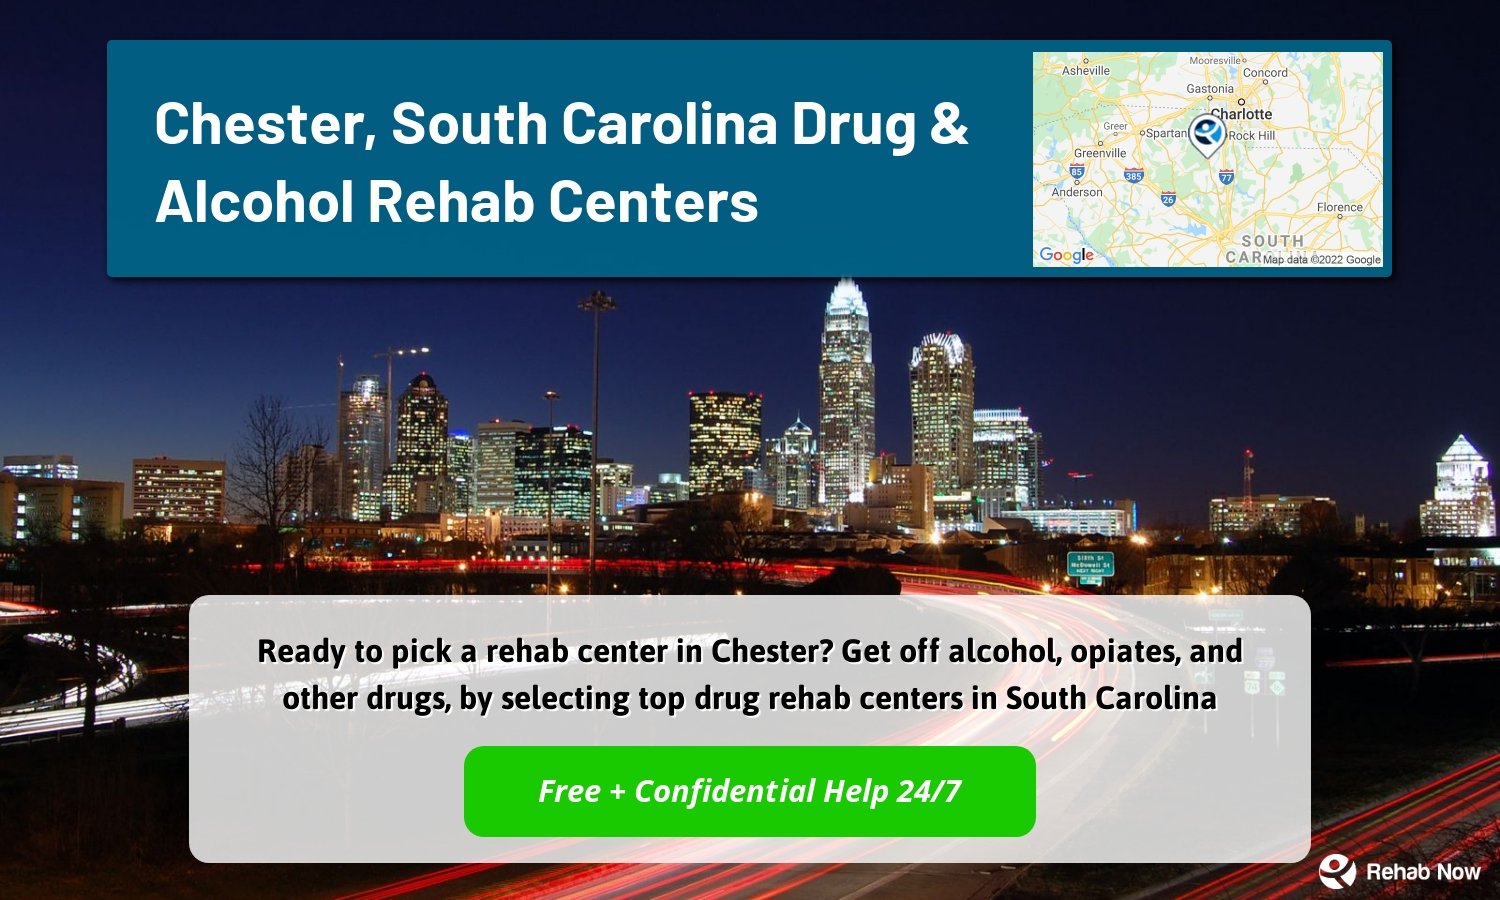 Ready to pick a rehab center in Chester? Get off alcohol, opiates, and other drugs, by selecting top drug rehab centers in South Carolina